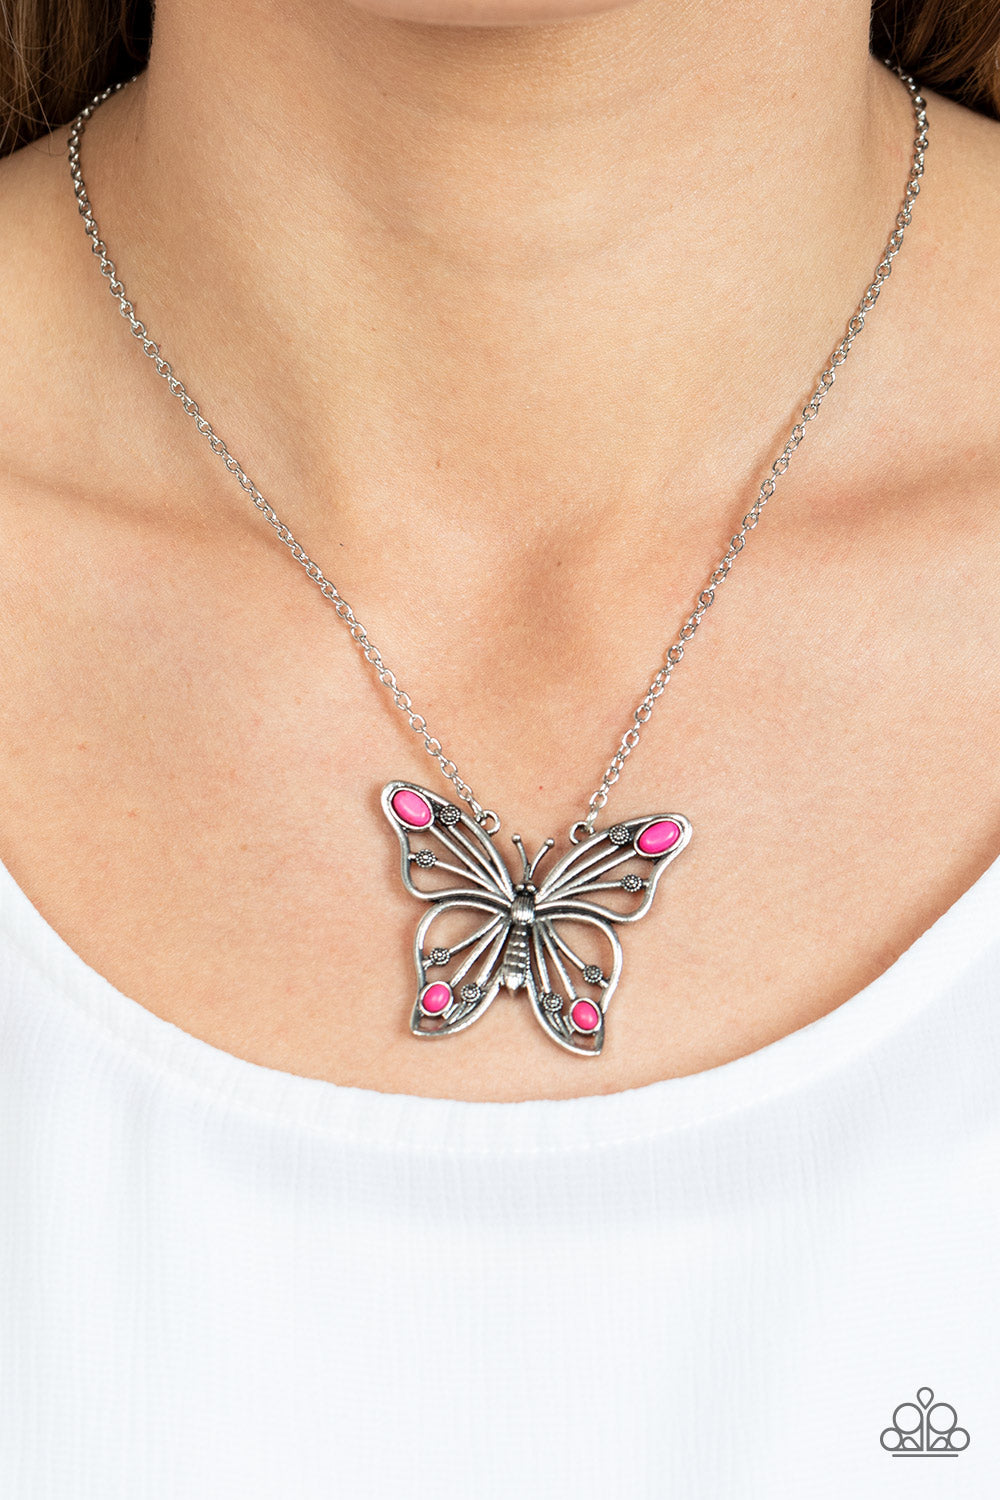 Paparazzi Badlands Butterfly - Pink Necklace- Paparazzi Jewelry Images